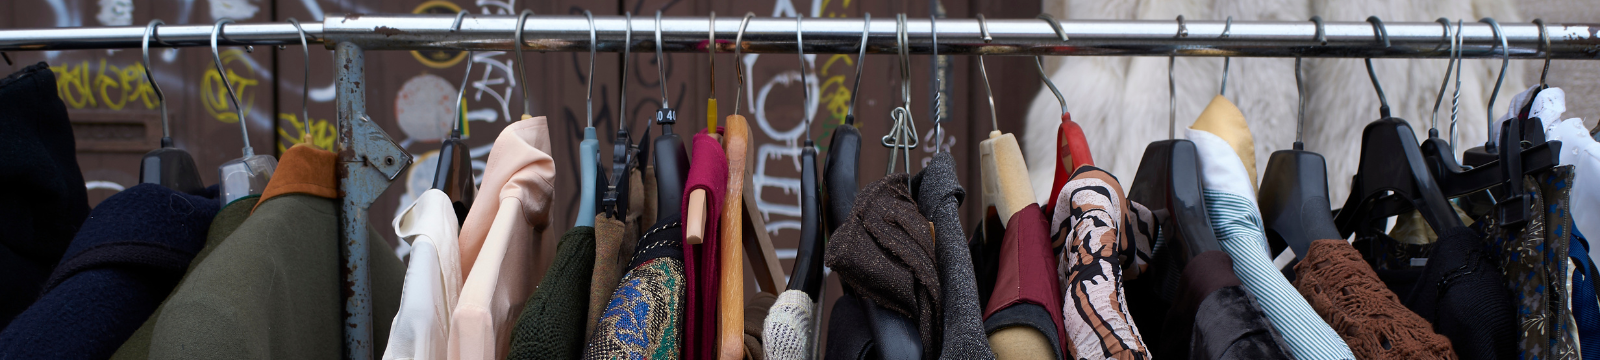 second hand clothing hanging on rack